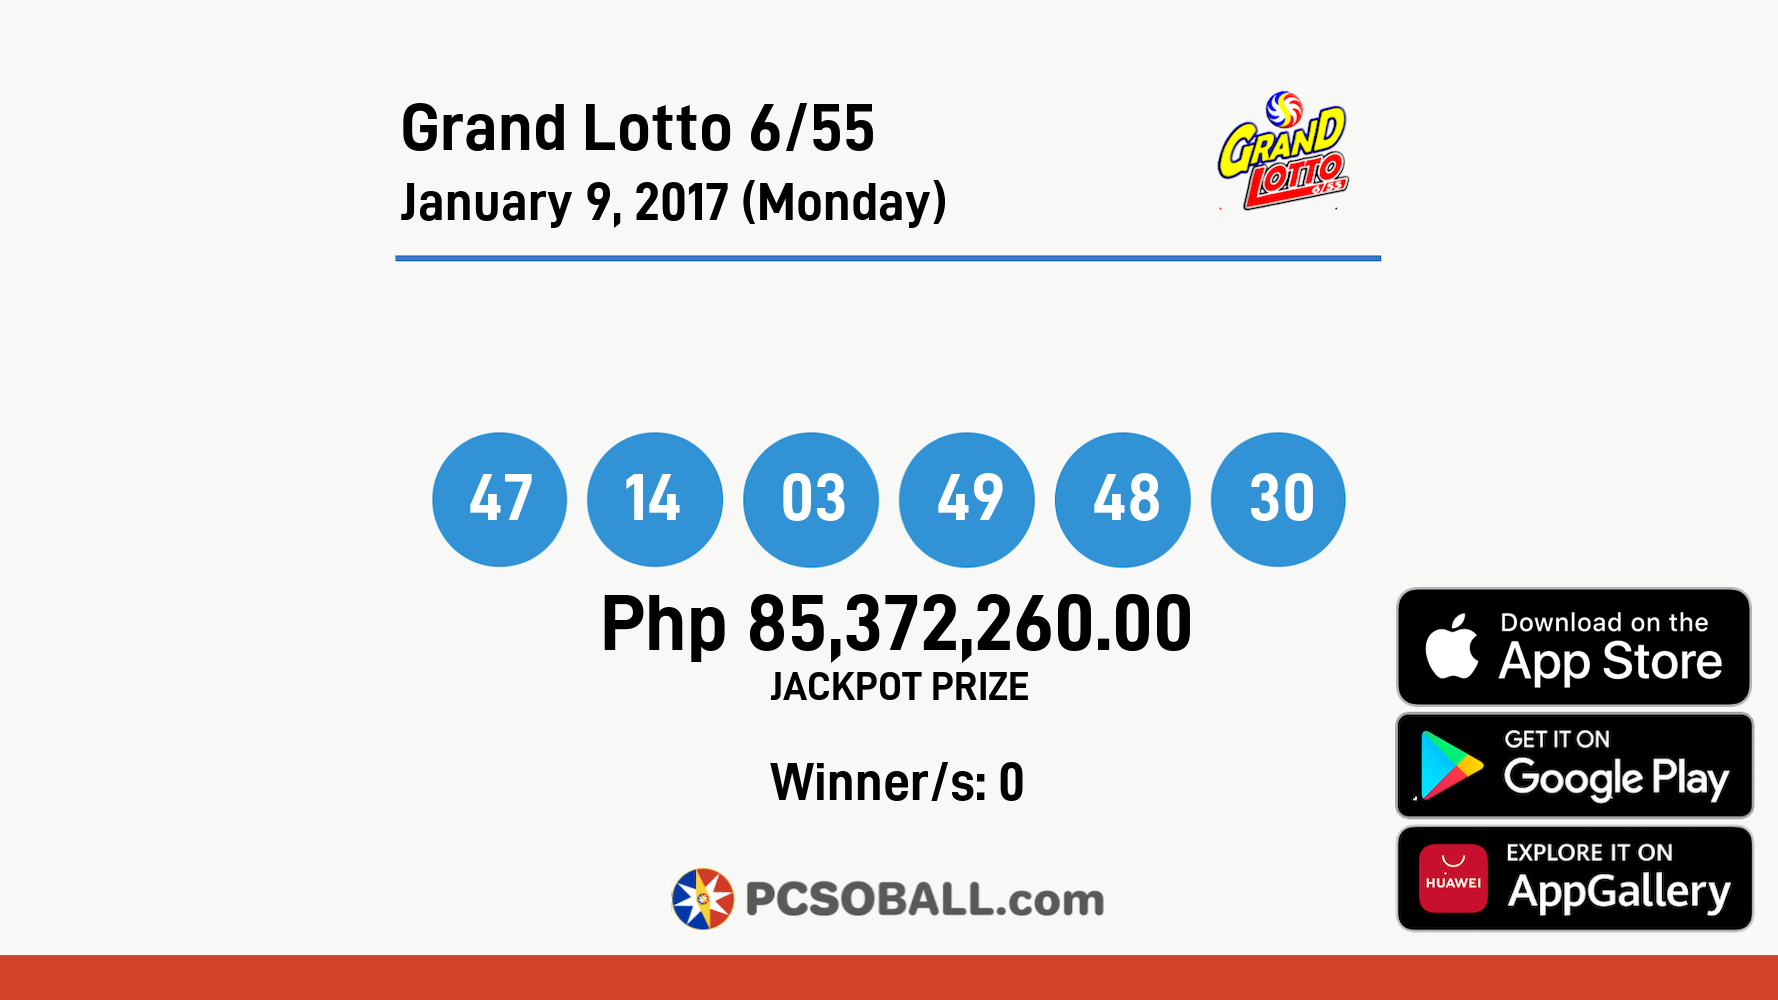 Grand Lotto 6/55 January 9, 2017 (Monday) Result